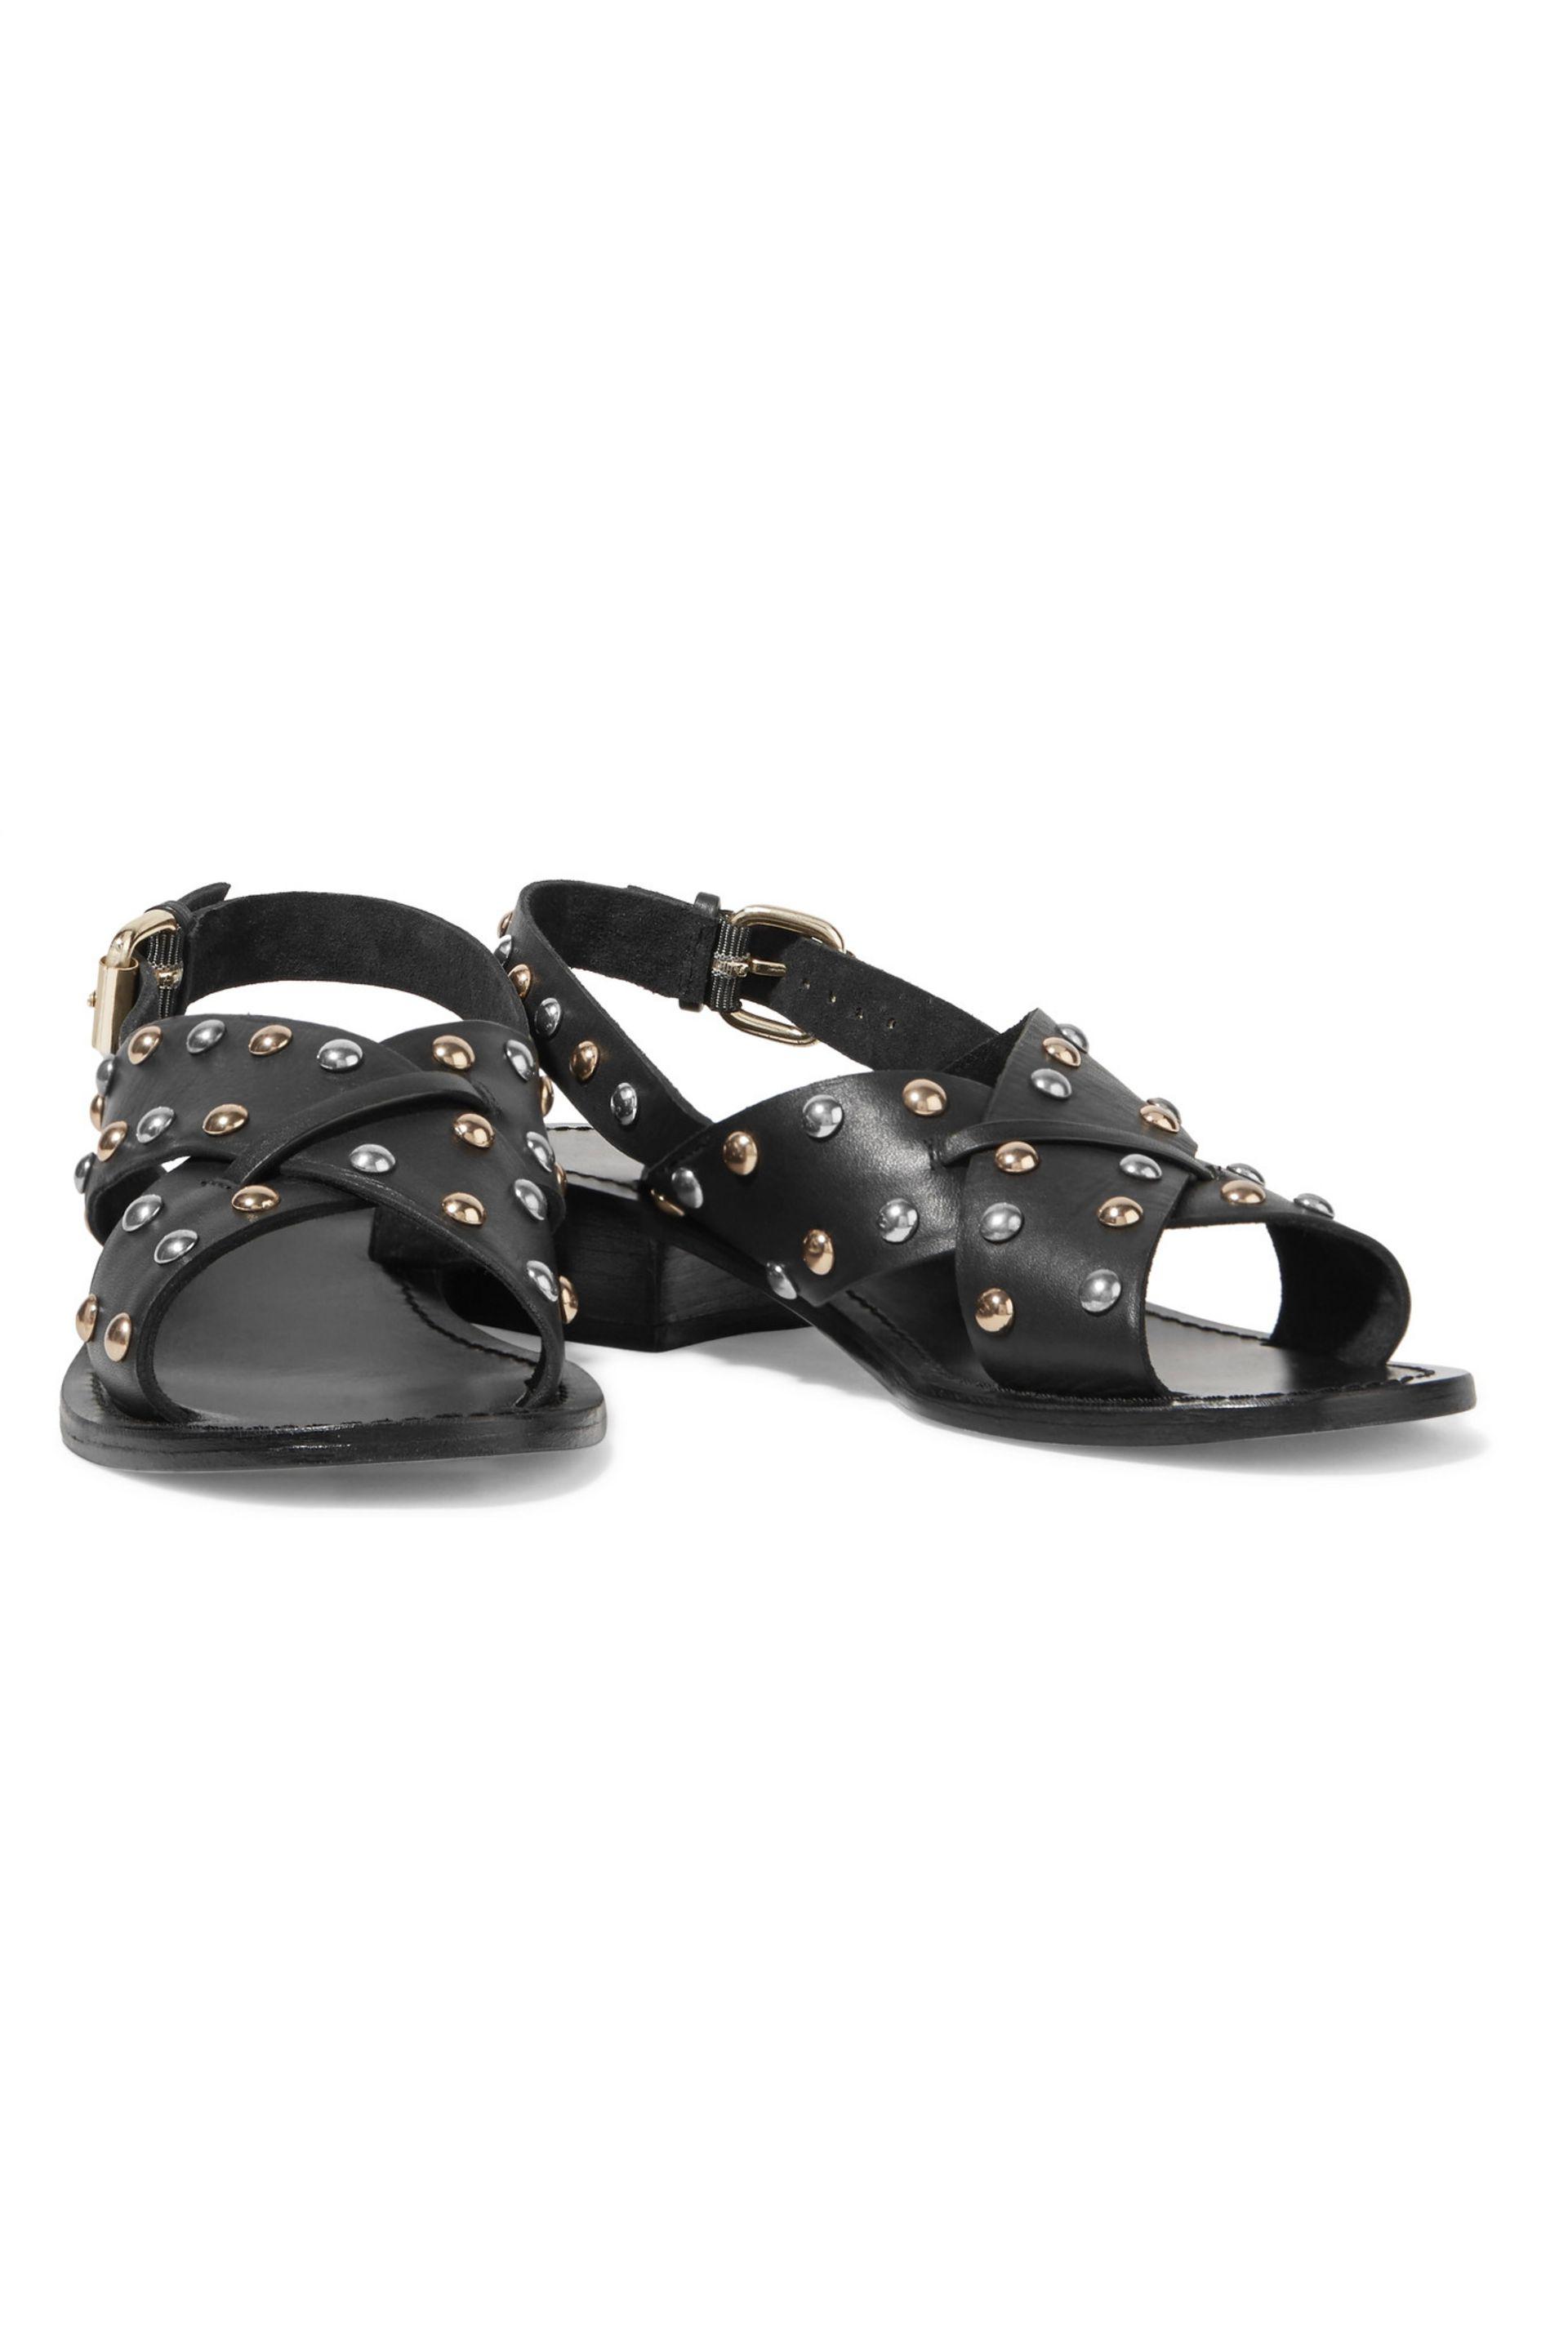 maje leather sandals decorated with studs